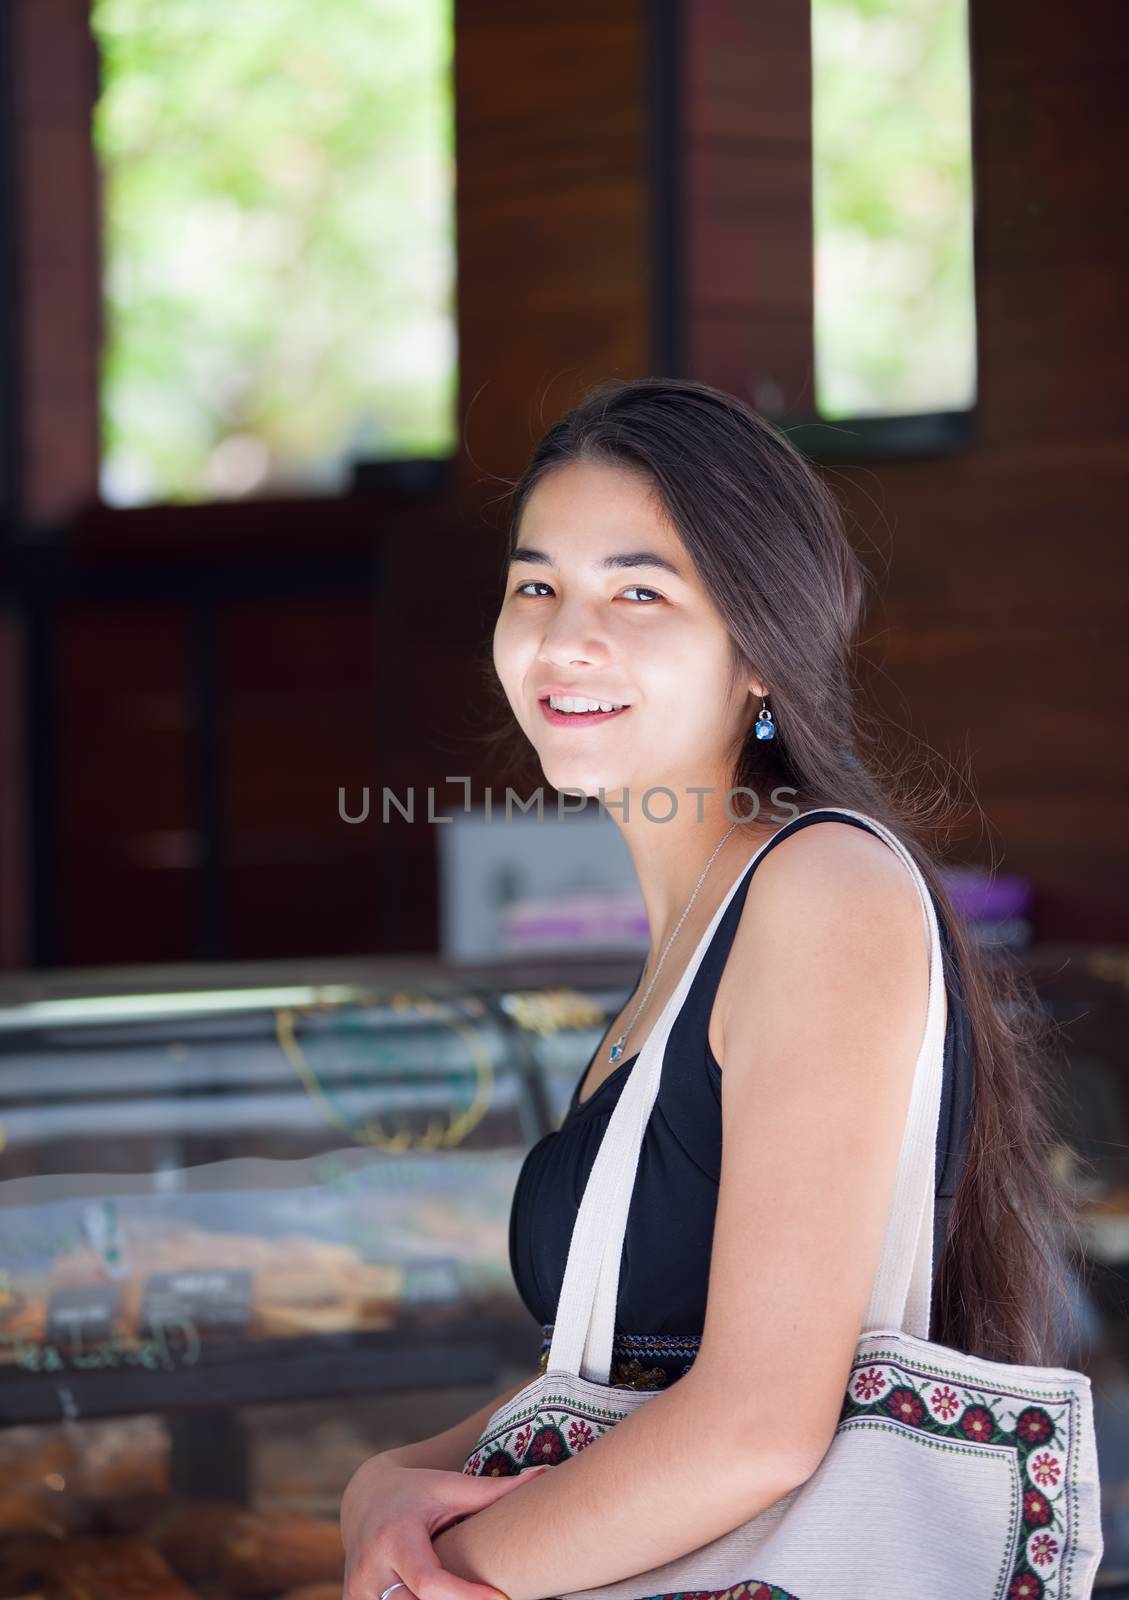 Biracial teen girl waiting in line at cafe counter by jarenwicklund